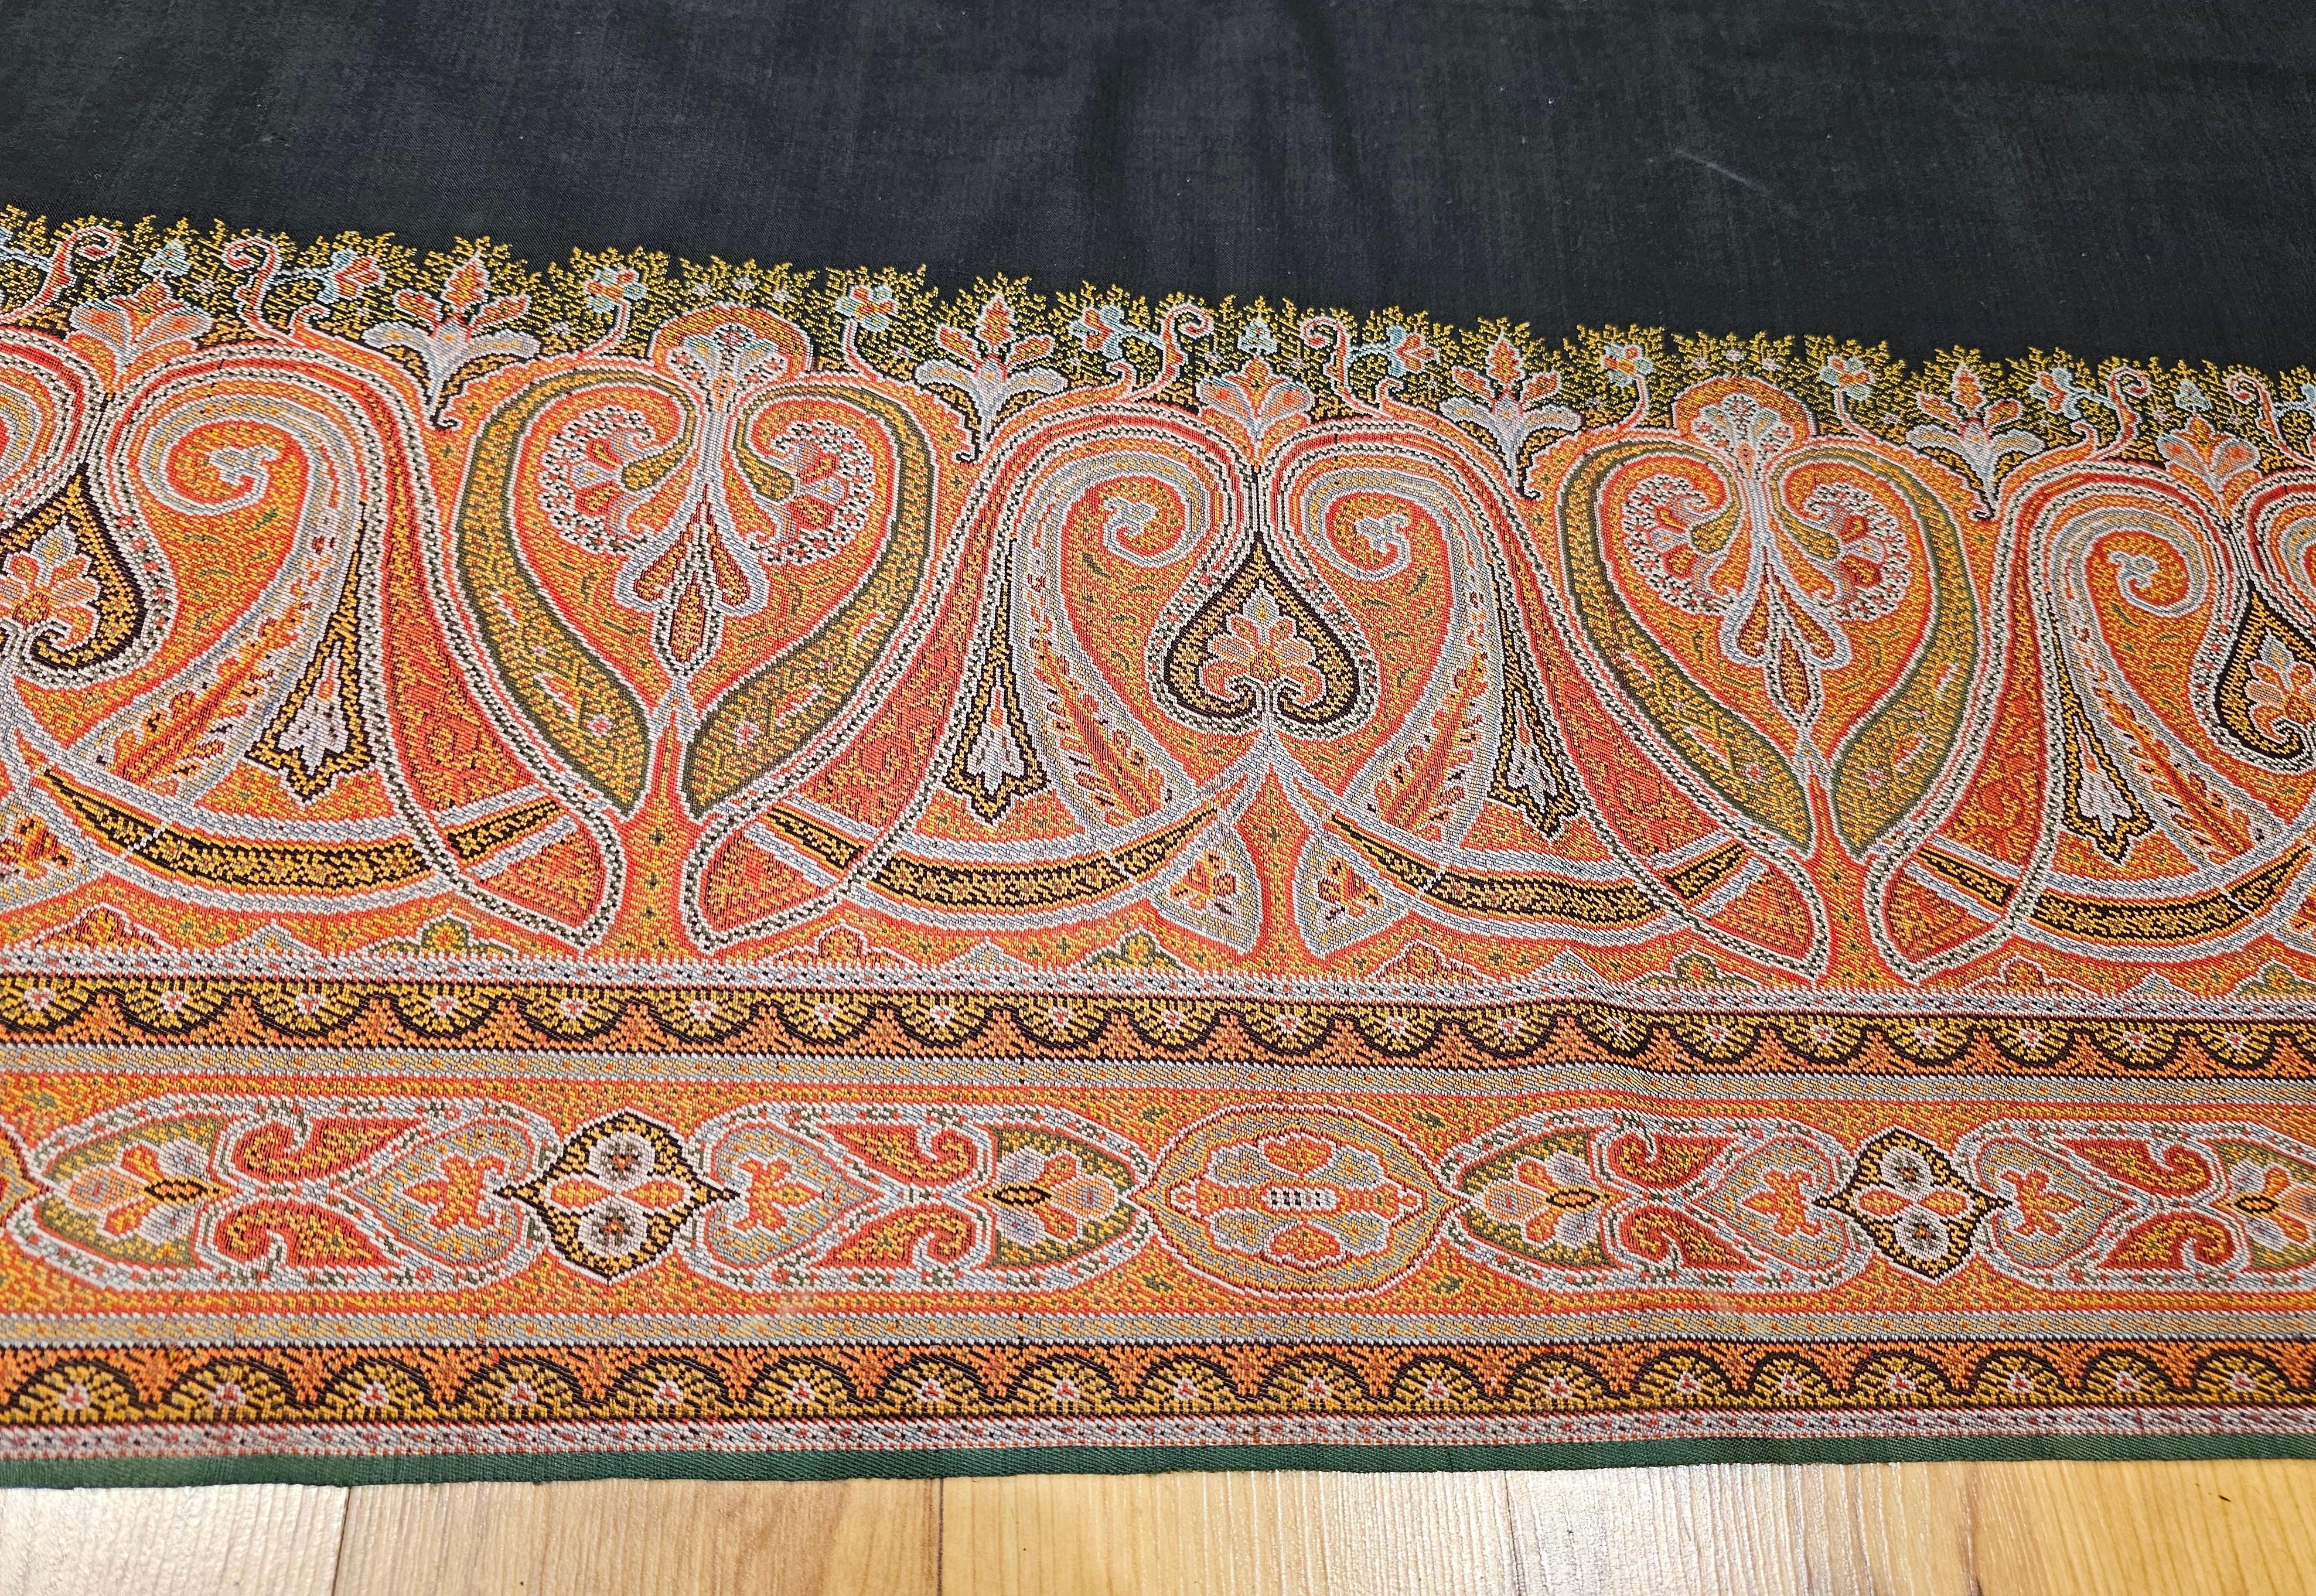 19th Century Hand-Woven Kashmiri Paisley Shawl in Brick Red, Black, Green For Sale 3